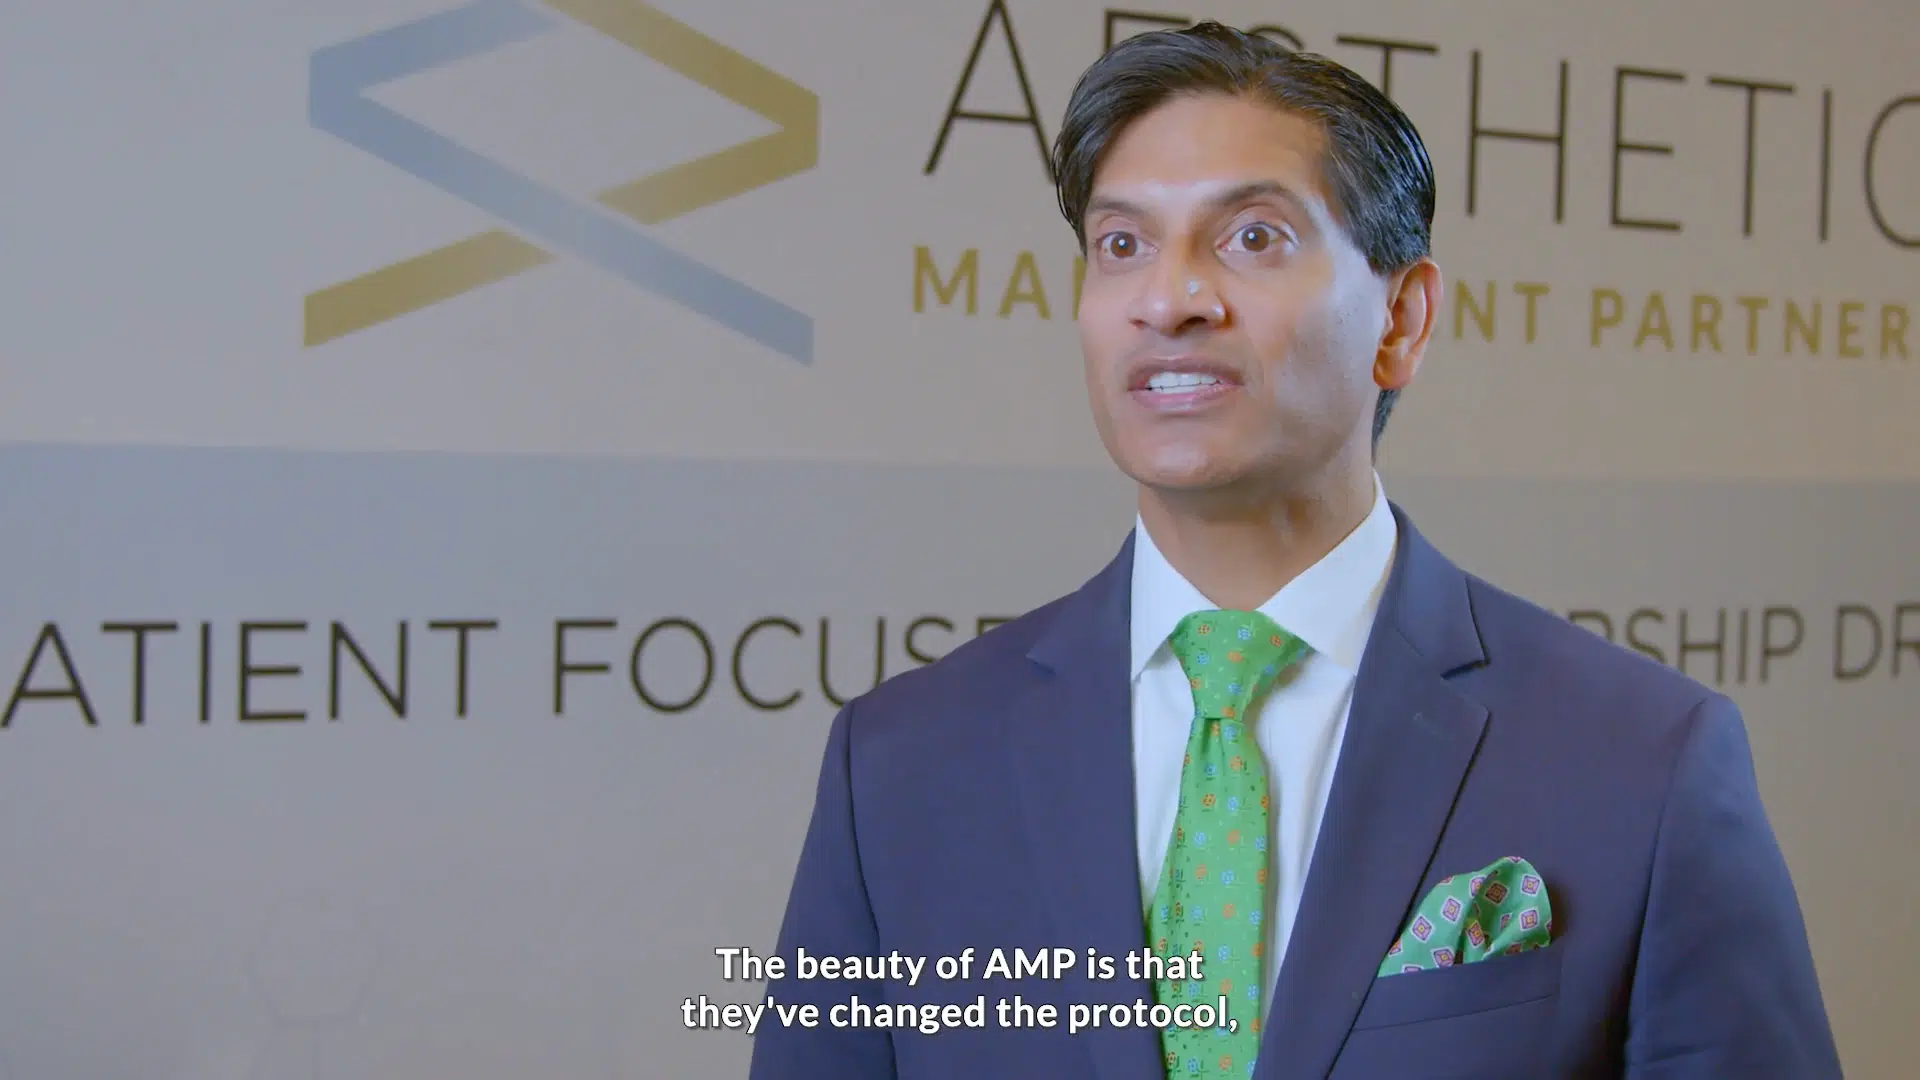 Screenshot 2022 01 07 at 17 15 56 Why Partner with AMP Dr Suneel Chilukuri.png - Aesthetic Management Partners - Medical Aesthetics Equipment For The Modern Practice